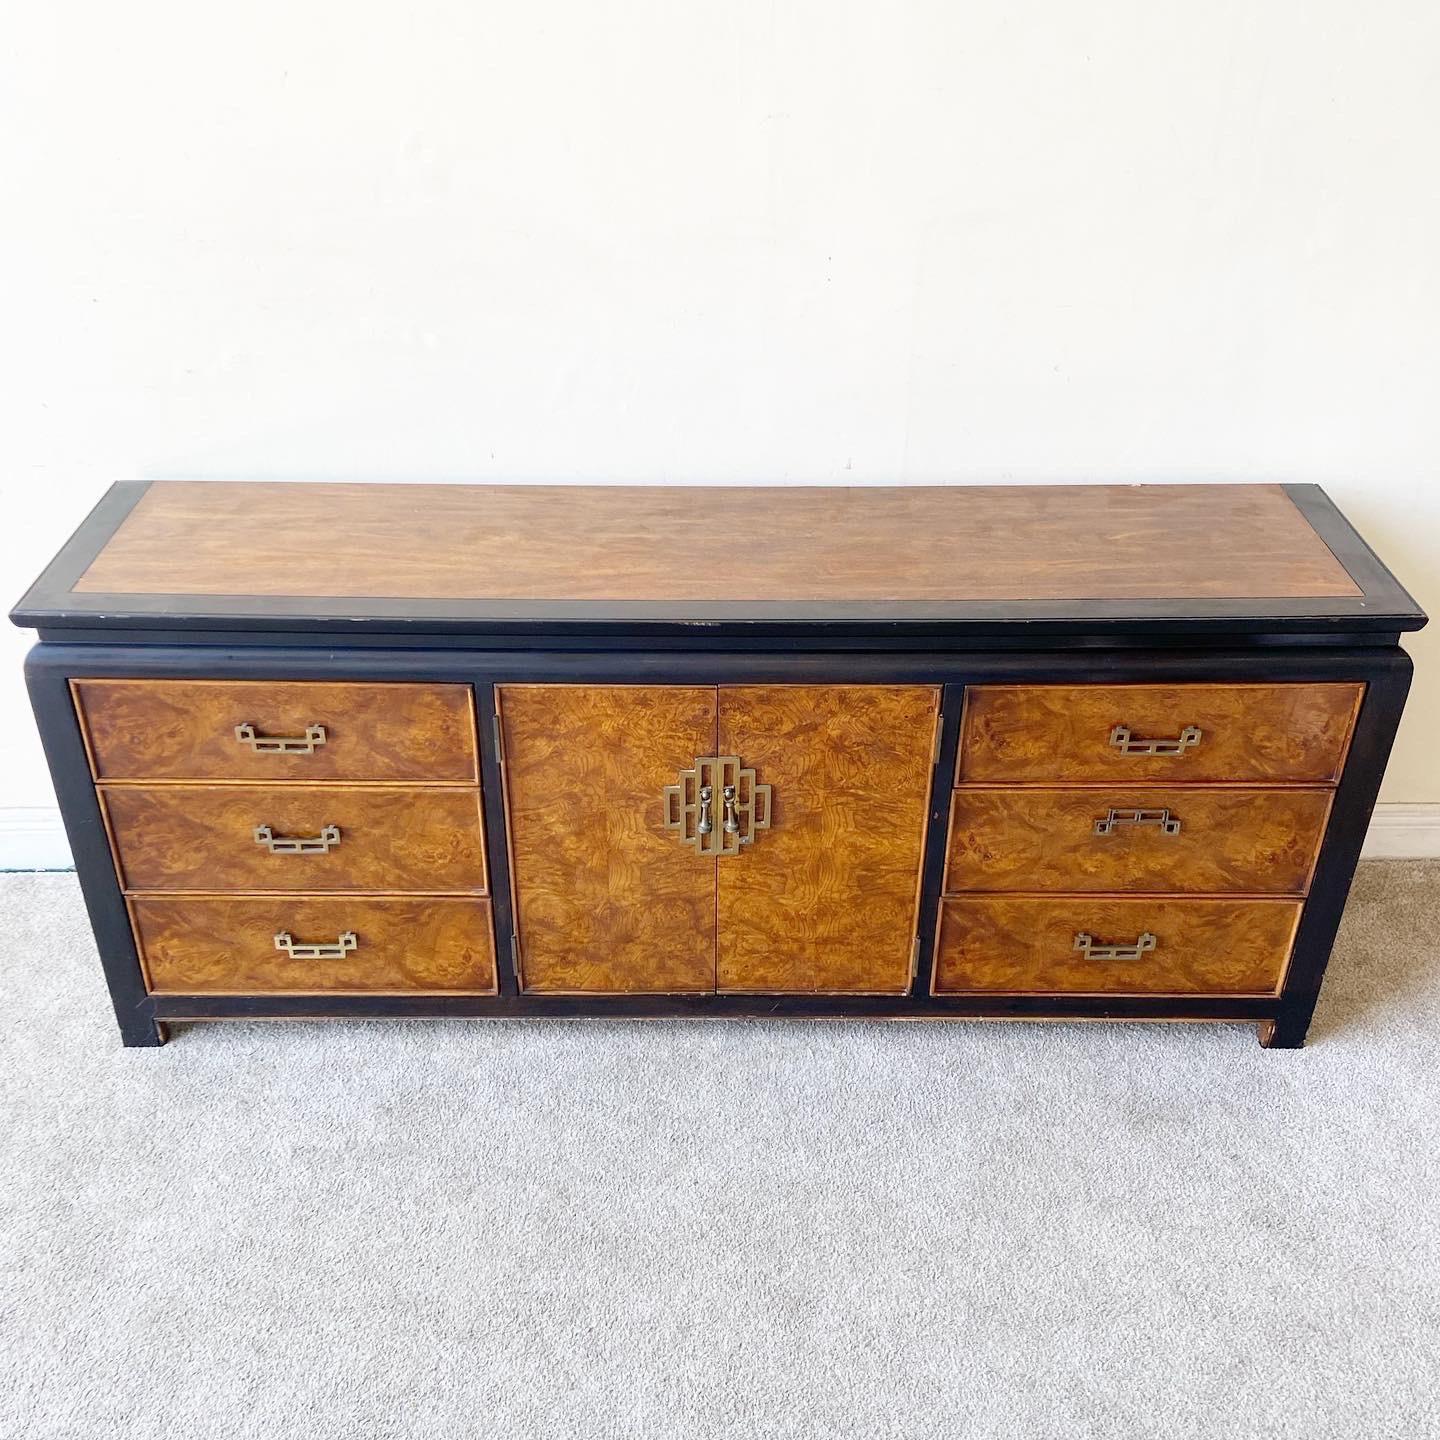 Exceptional chinoiserie dresser by Century Furniture. Features burl wood drawer faces with a black frame.
 